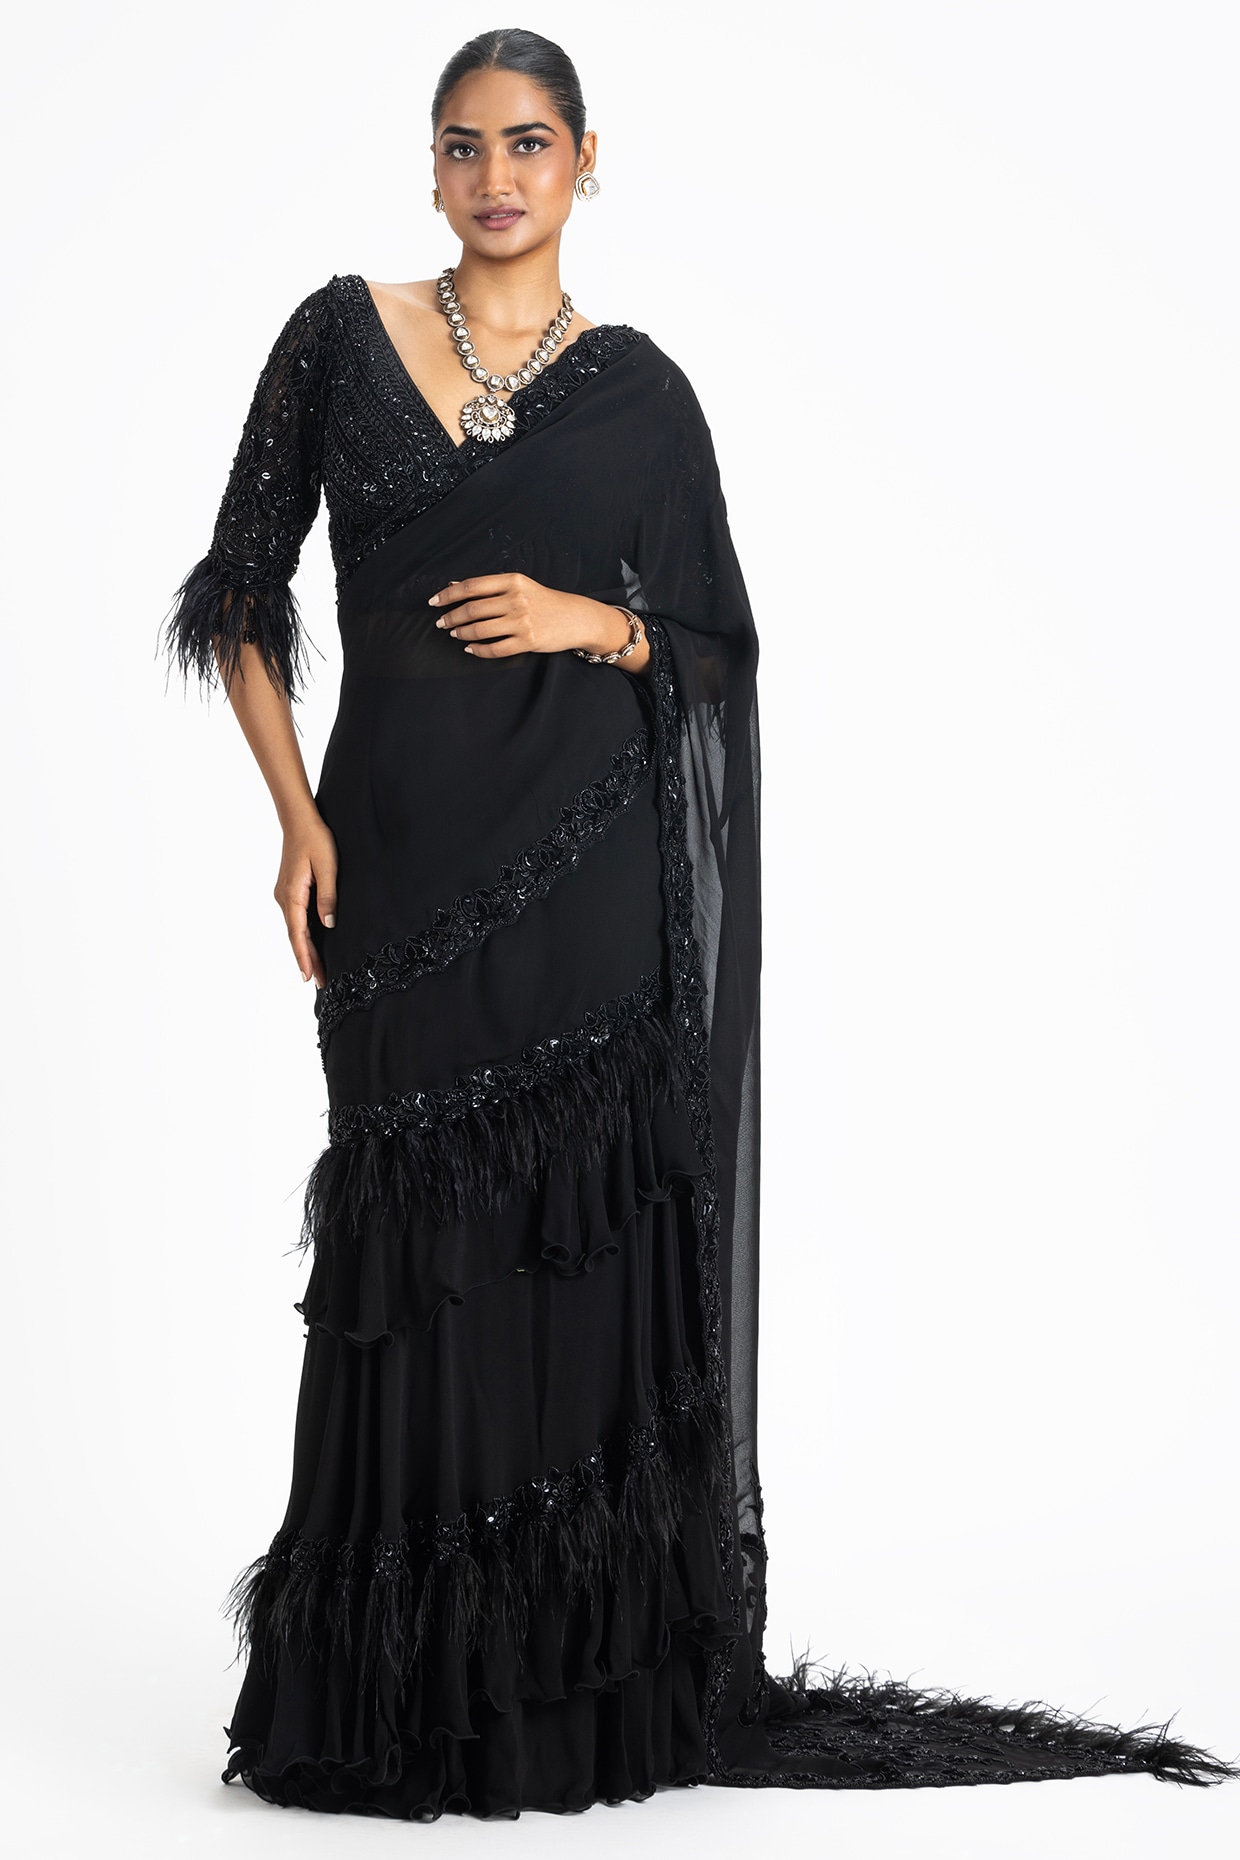 Black Color Sequins Work Georgette Frill Saree for Cocktail at Rs 6385.00 |  Sequins Work Saree | ID: 2851941526388